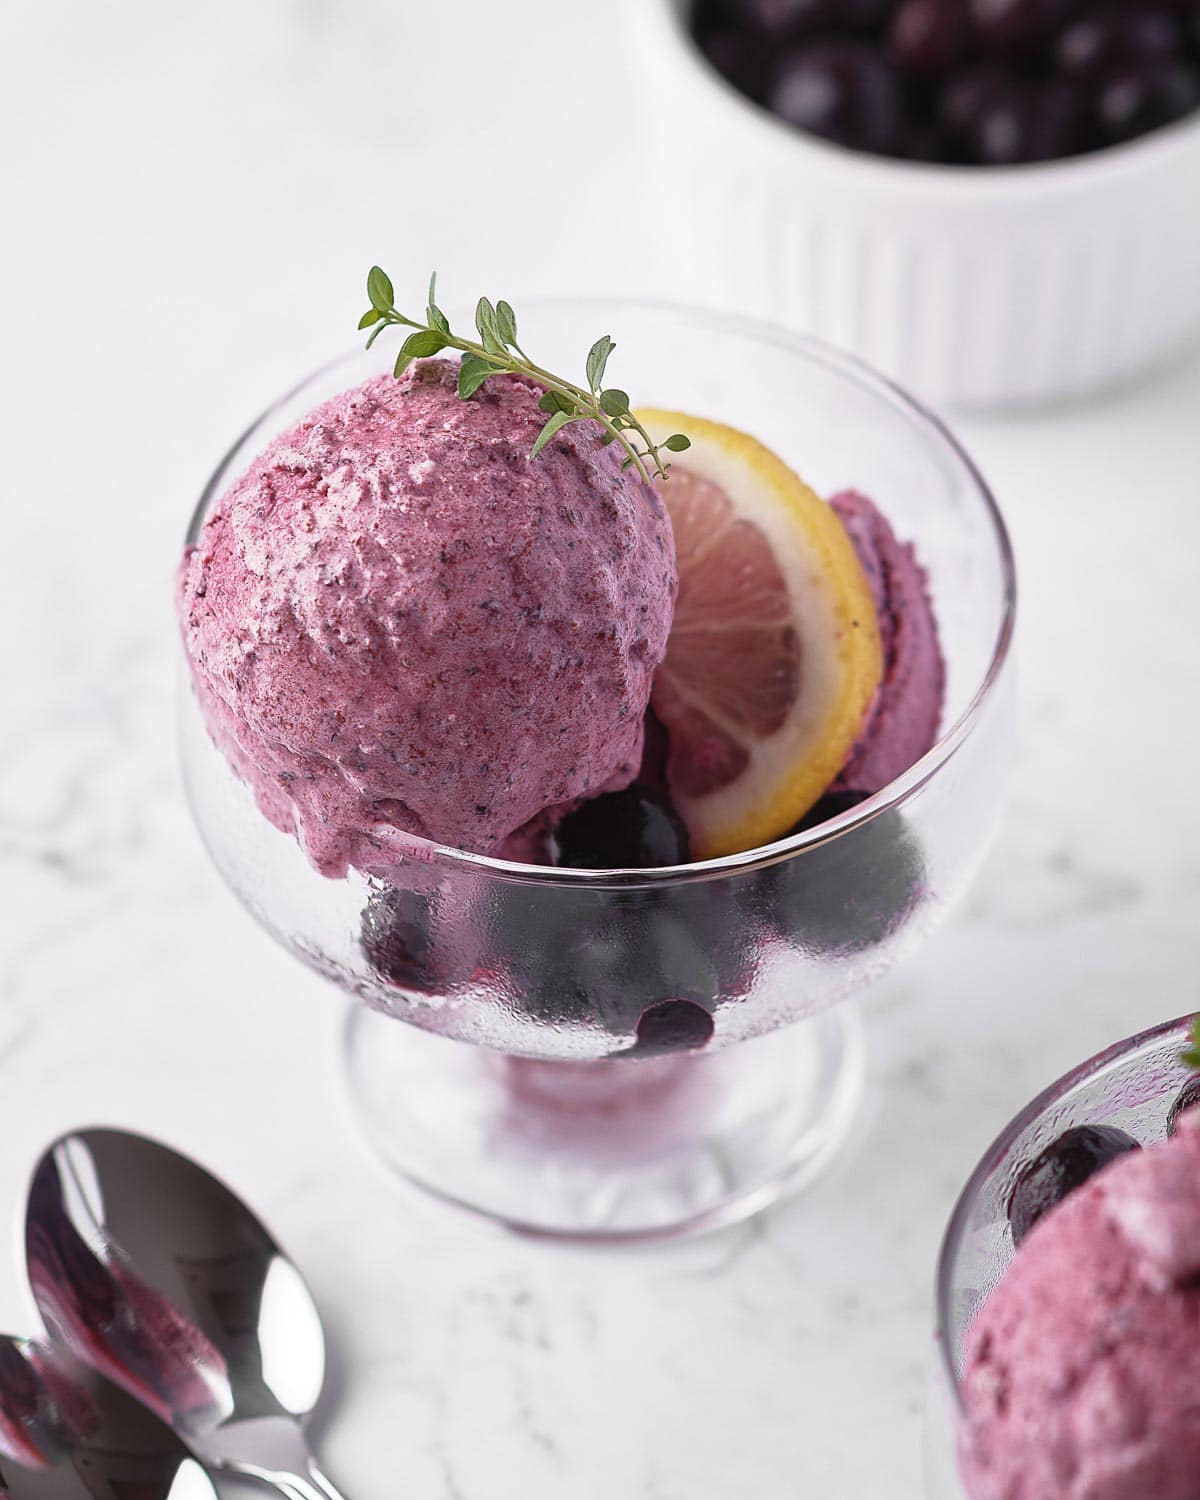 Melting scoop of blueberry sherbet in glass cup.